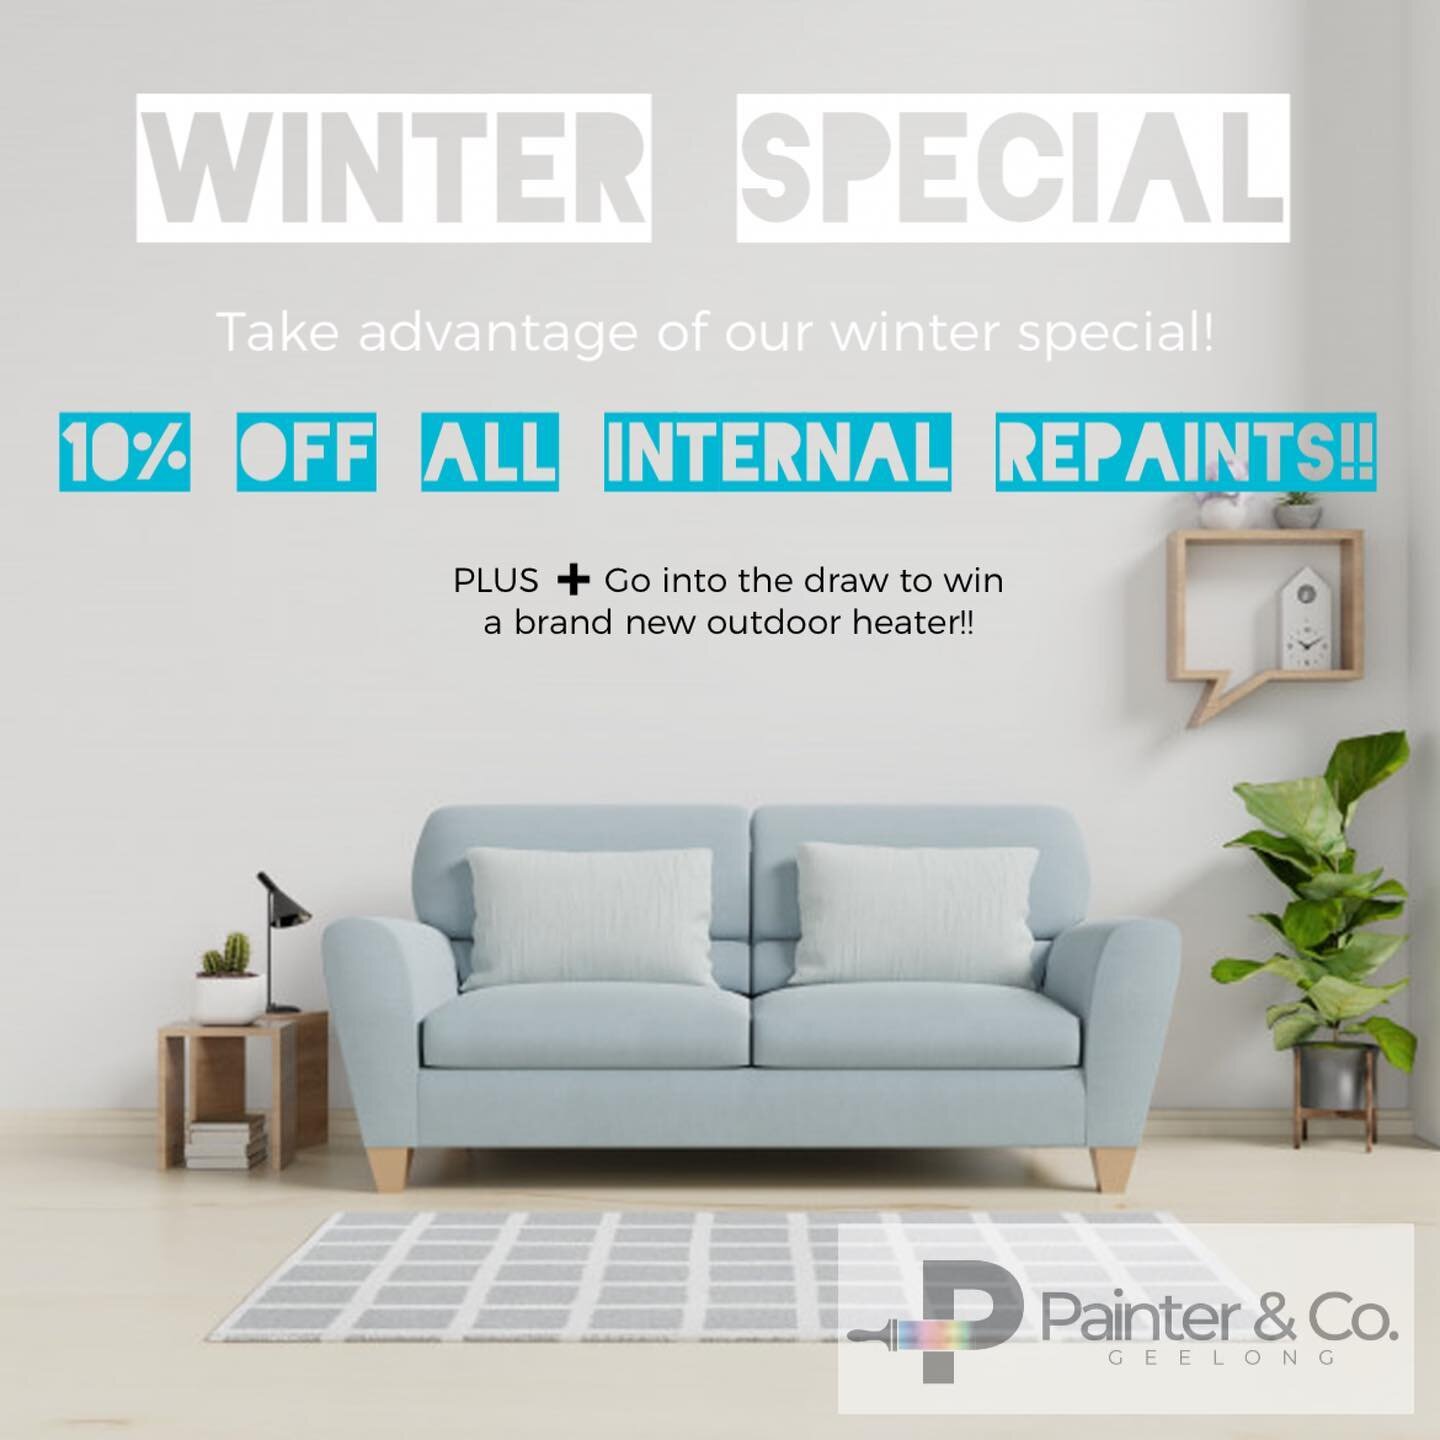 ❄️ WINTER SPECIAL ❄️ ⠀
⠀
Do you need some Internal Painting done this winter? ⠀
⠀
We are offering 10% off any Internal Repaint quoted before the end of August and you will go in the draw to win a new outdoor gas heater! ⠀
⠀
Simply, get in touch to or